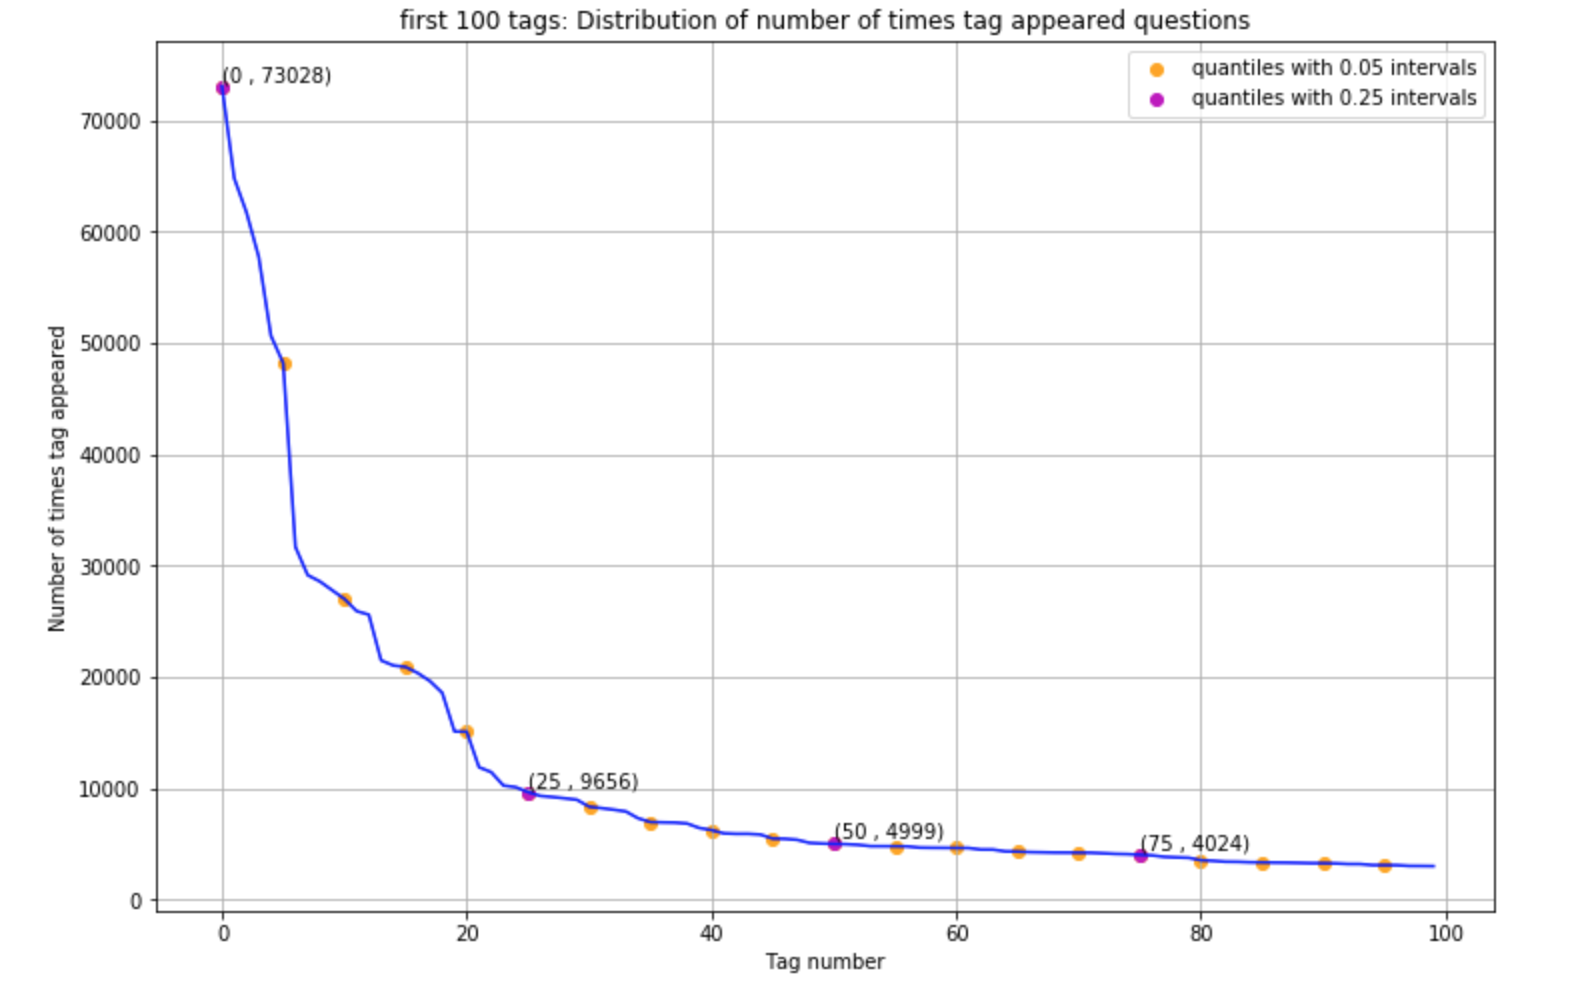 Distribution of number of times tag appeared in questions(for first 100 tags)